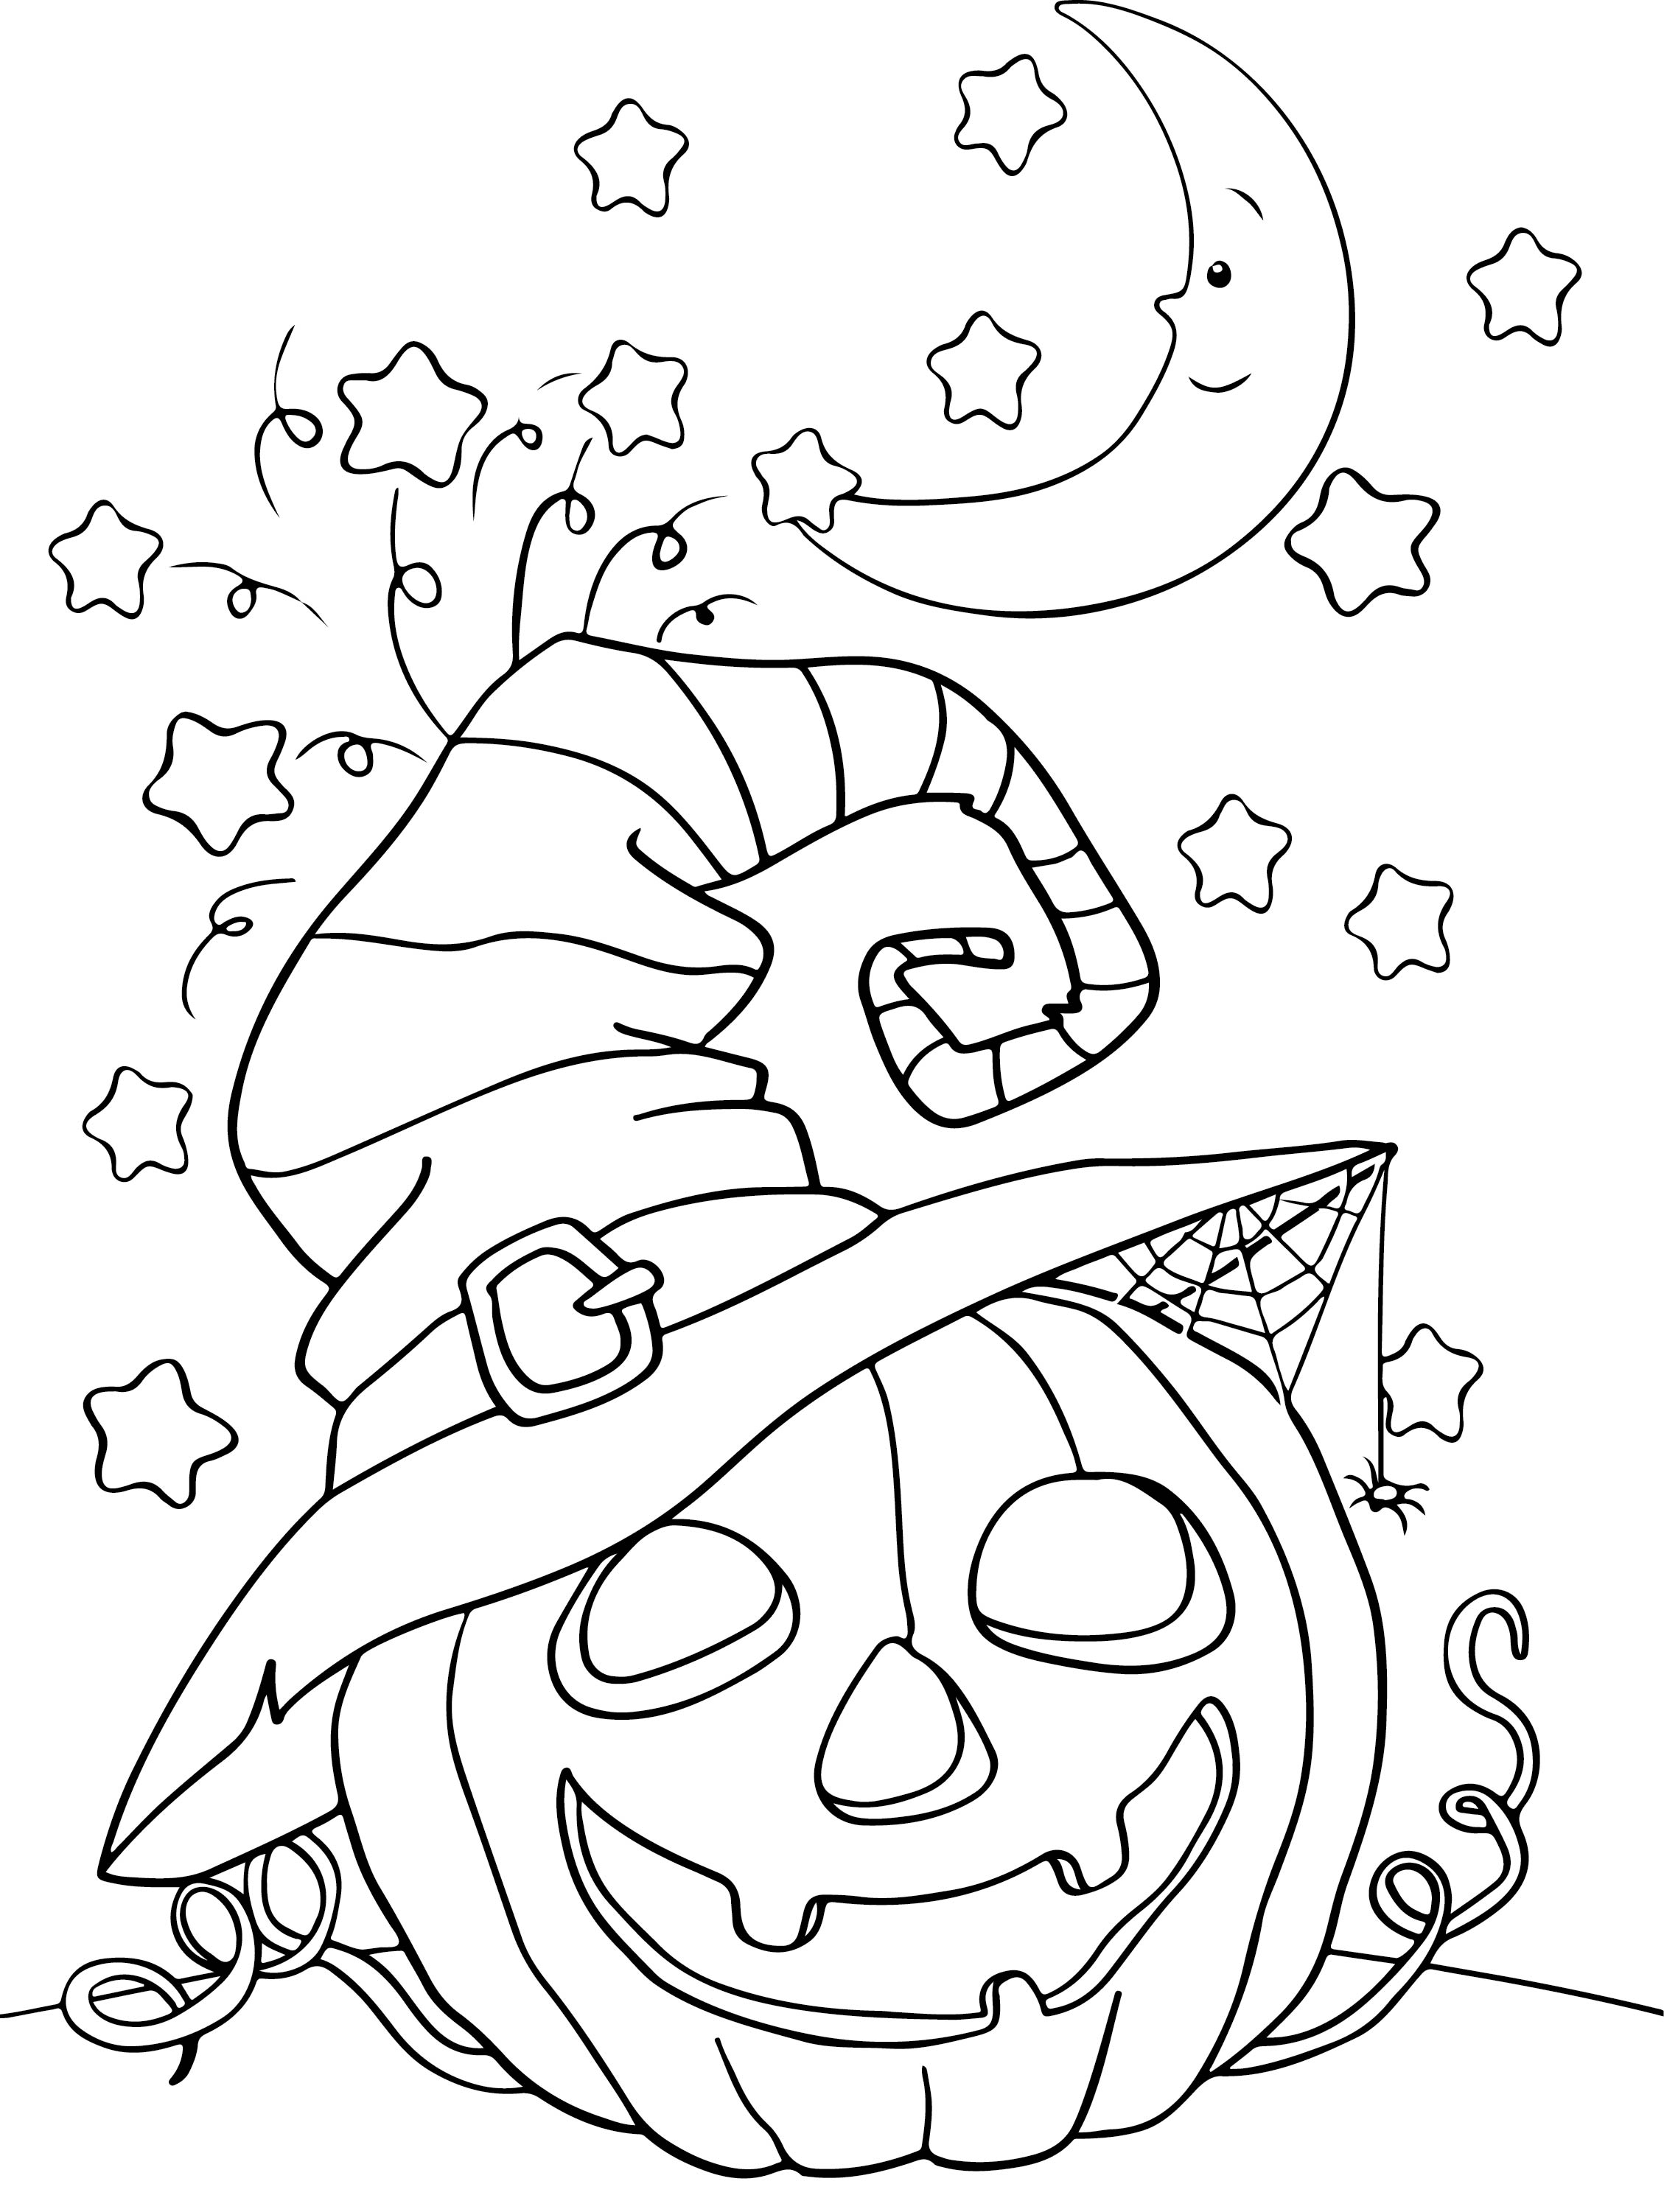 Halloween Colouring Sheets Free Printables